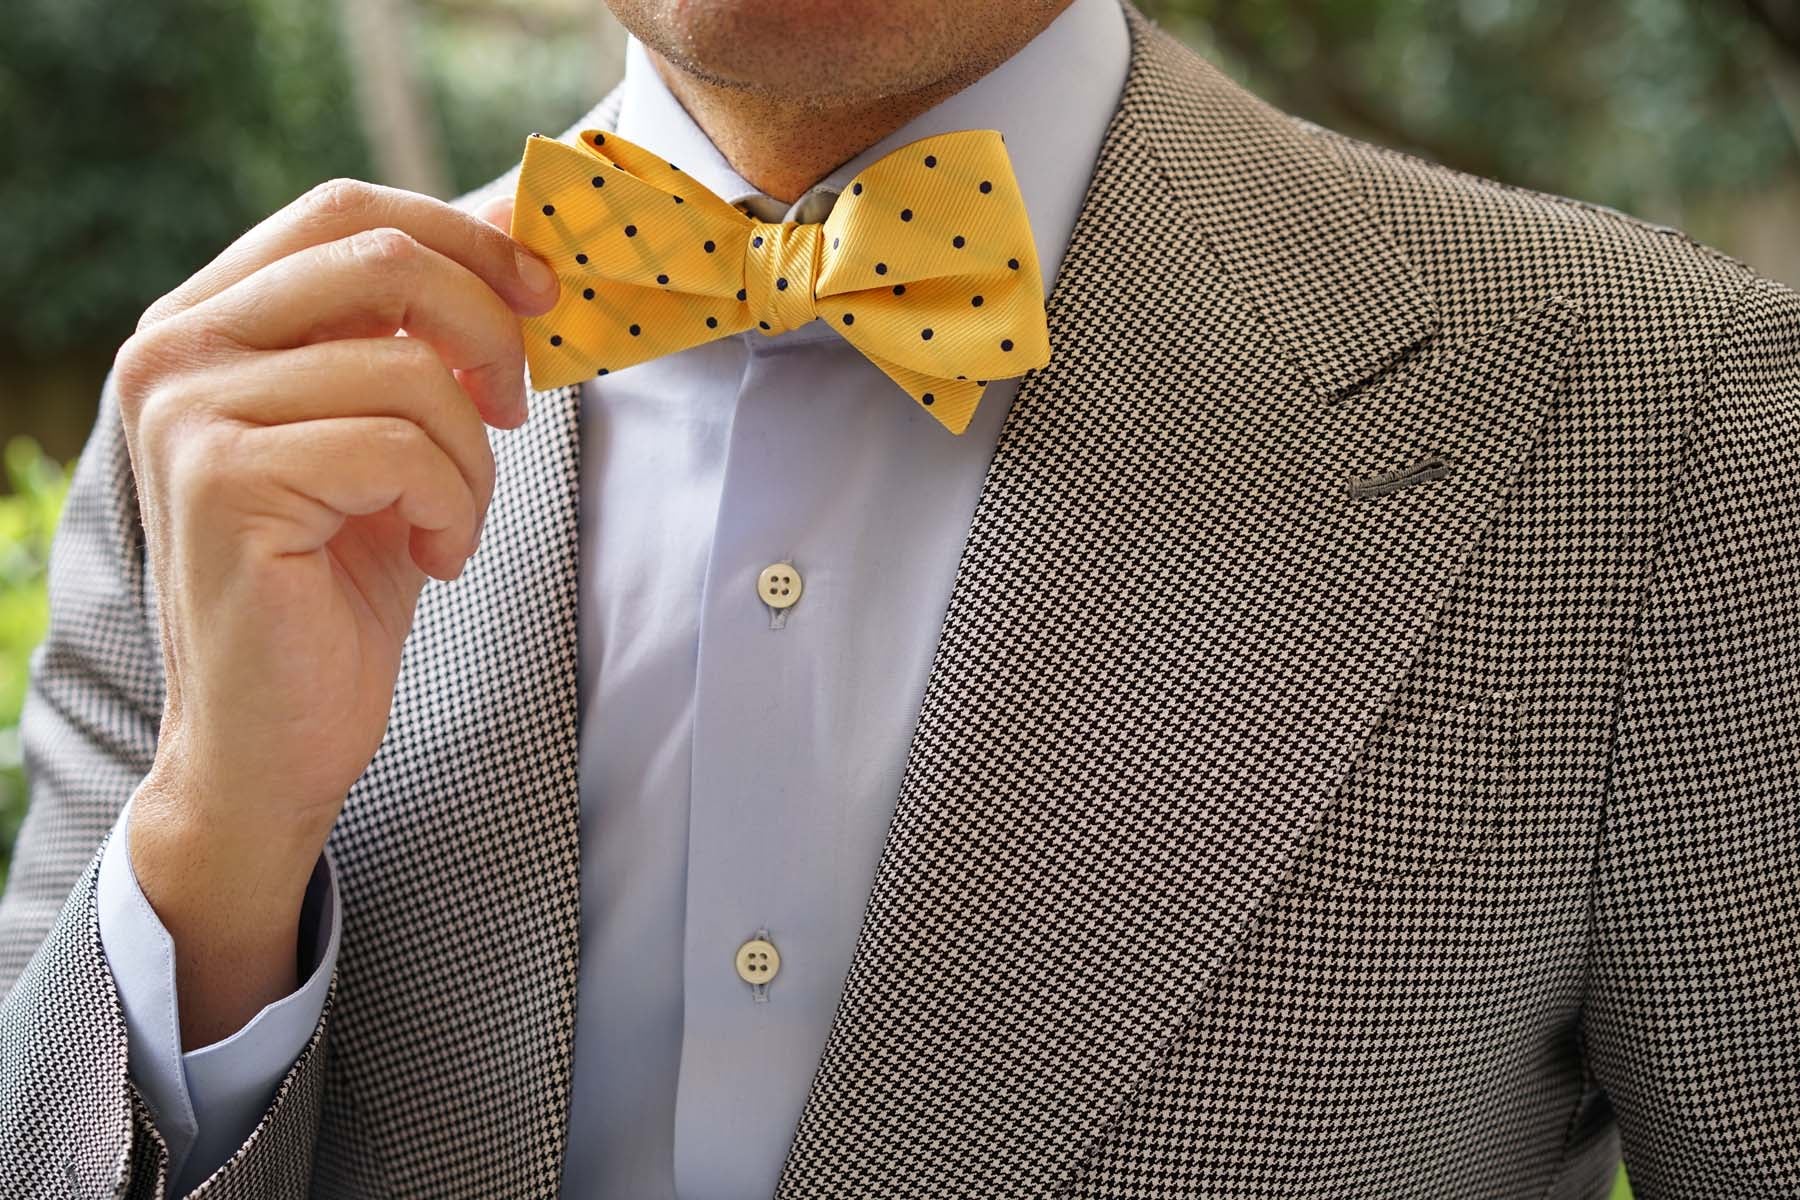 Yellow Bow Tie Untied with Polka Dots | Men's Self-Tied Bowties Online ...